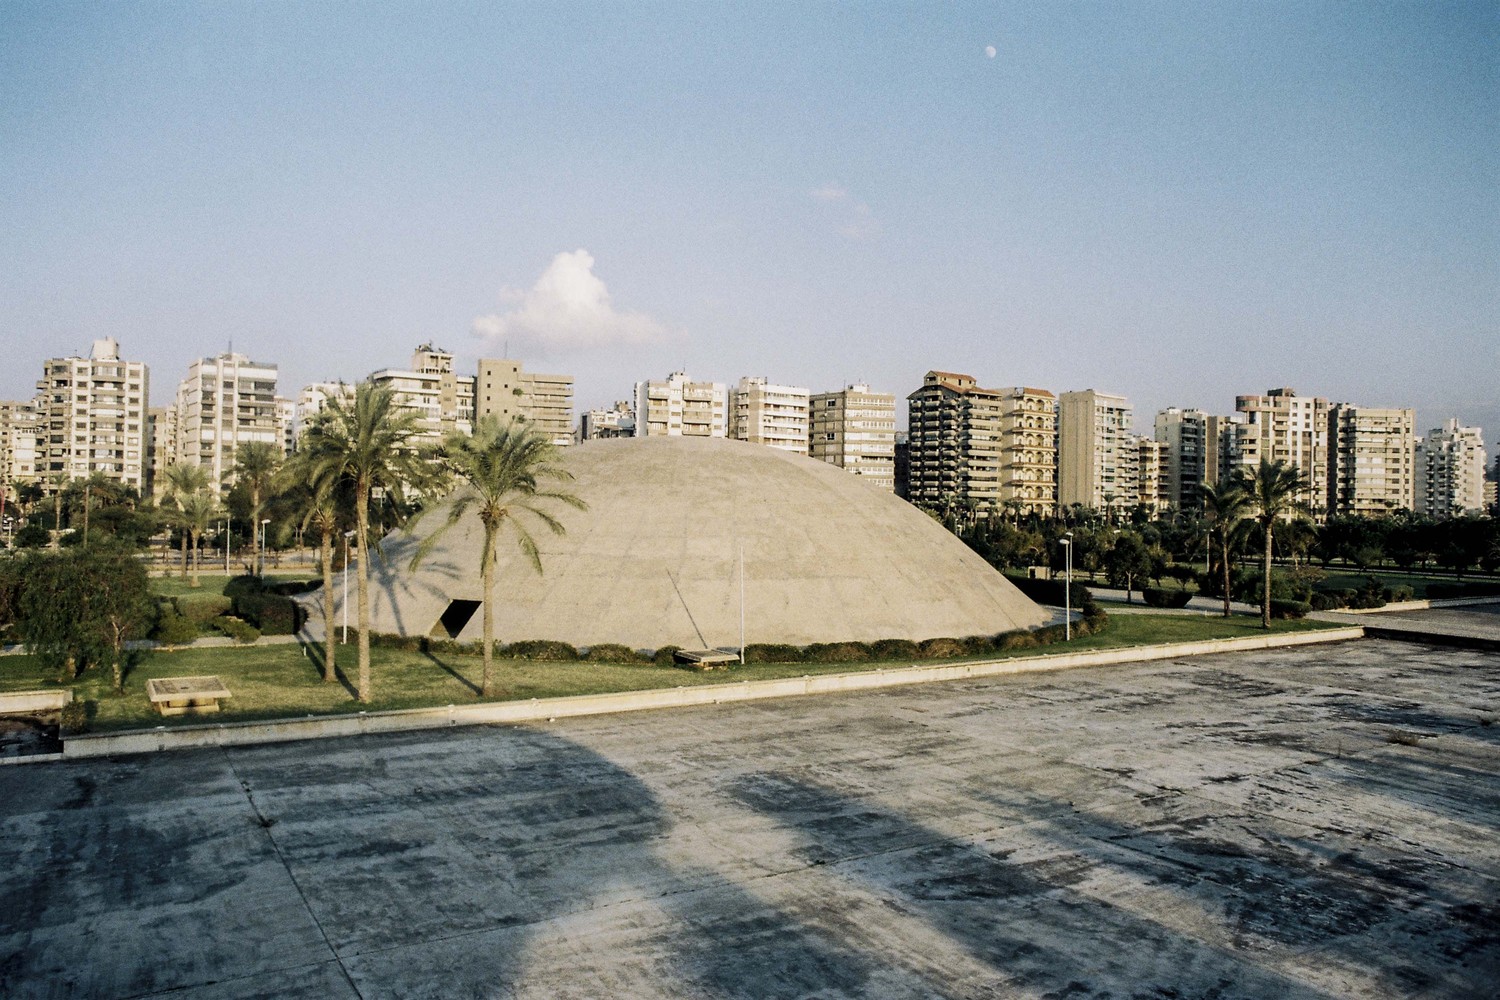 The Enclosed Theatre; part of the unfinished international fairgrounds in Tripoli, Lebanon, designed by Oscar Niemeyer. <br />
<br />
The construction of the grounds stopped in 1975 with the outbreak of the civil war in Lebanon. Shot by Anthony Saroufim.